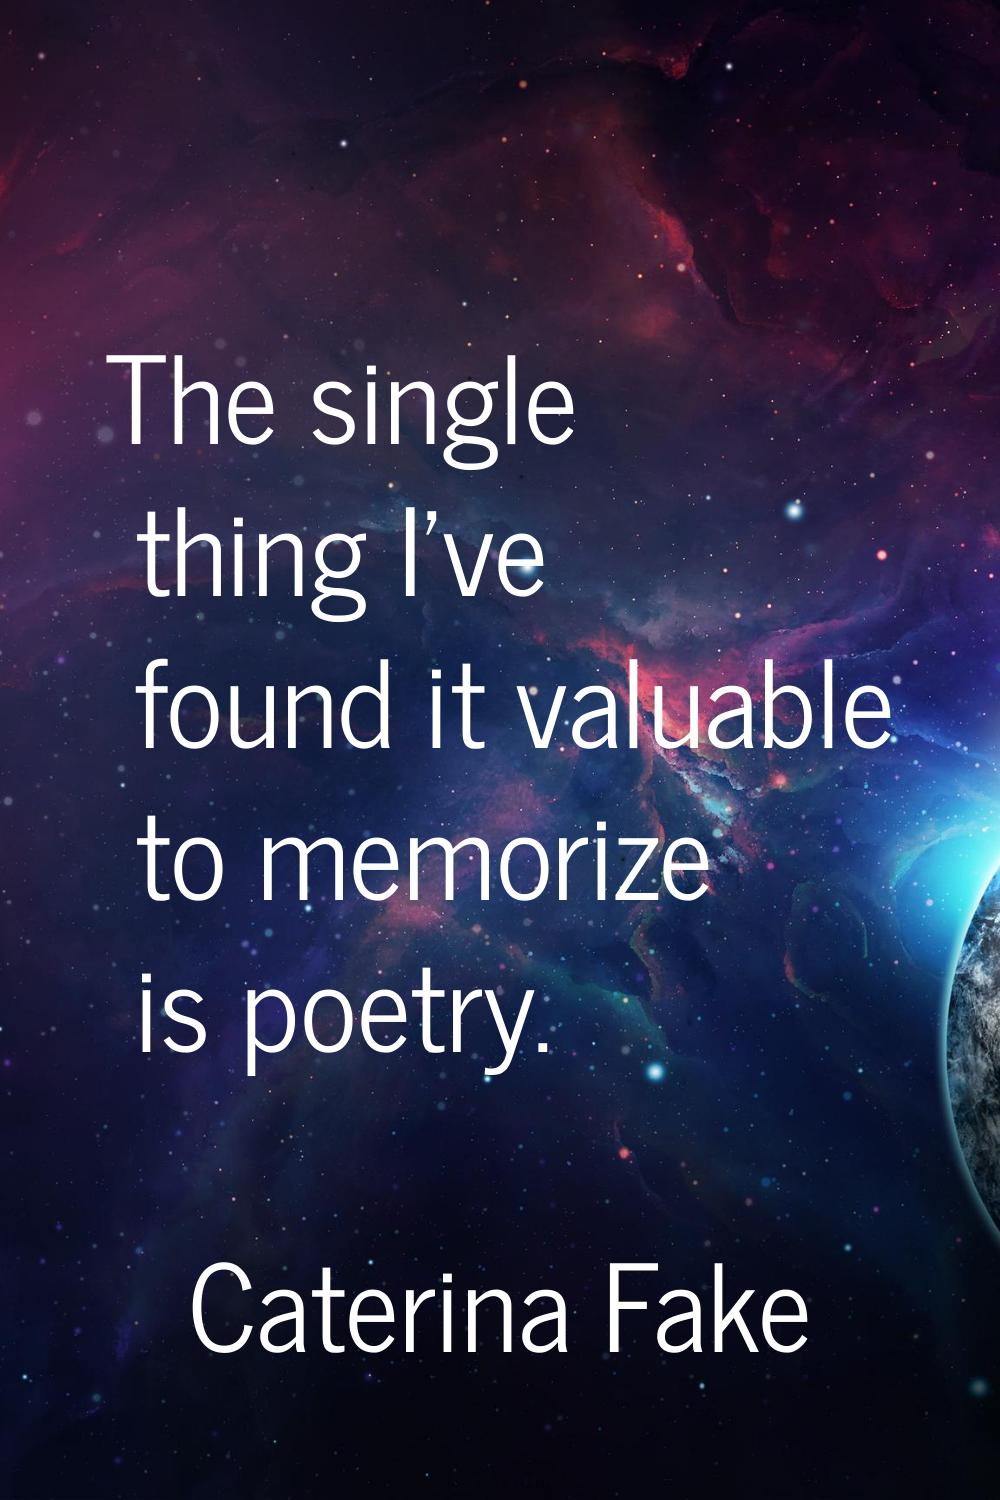 The single thing I've found it valuable to memorize is poetry.